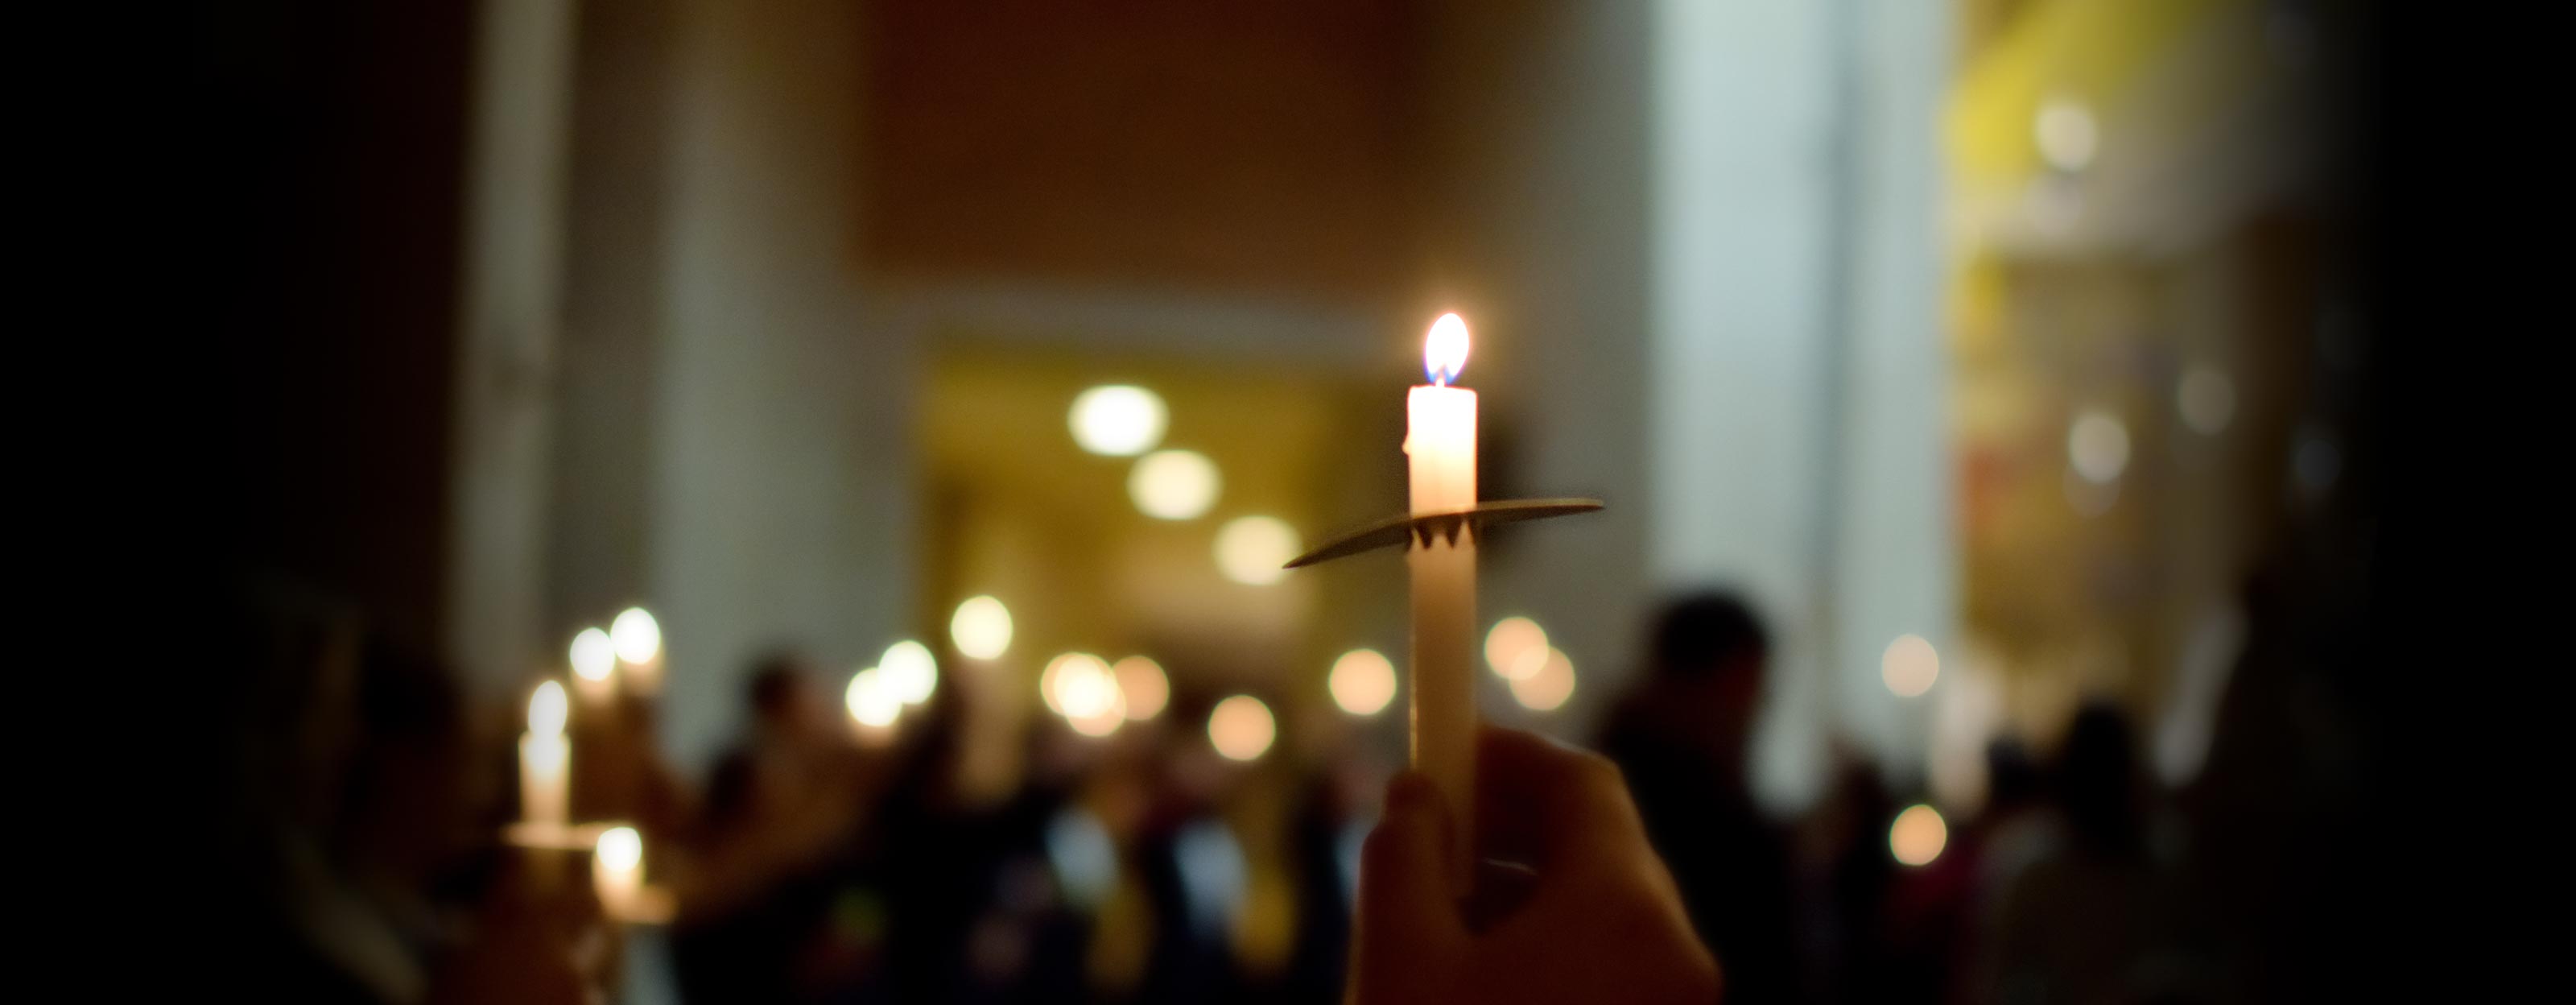 A hand holds a candle during a prayer service